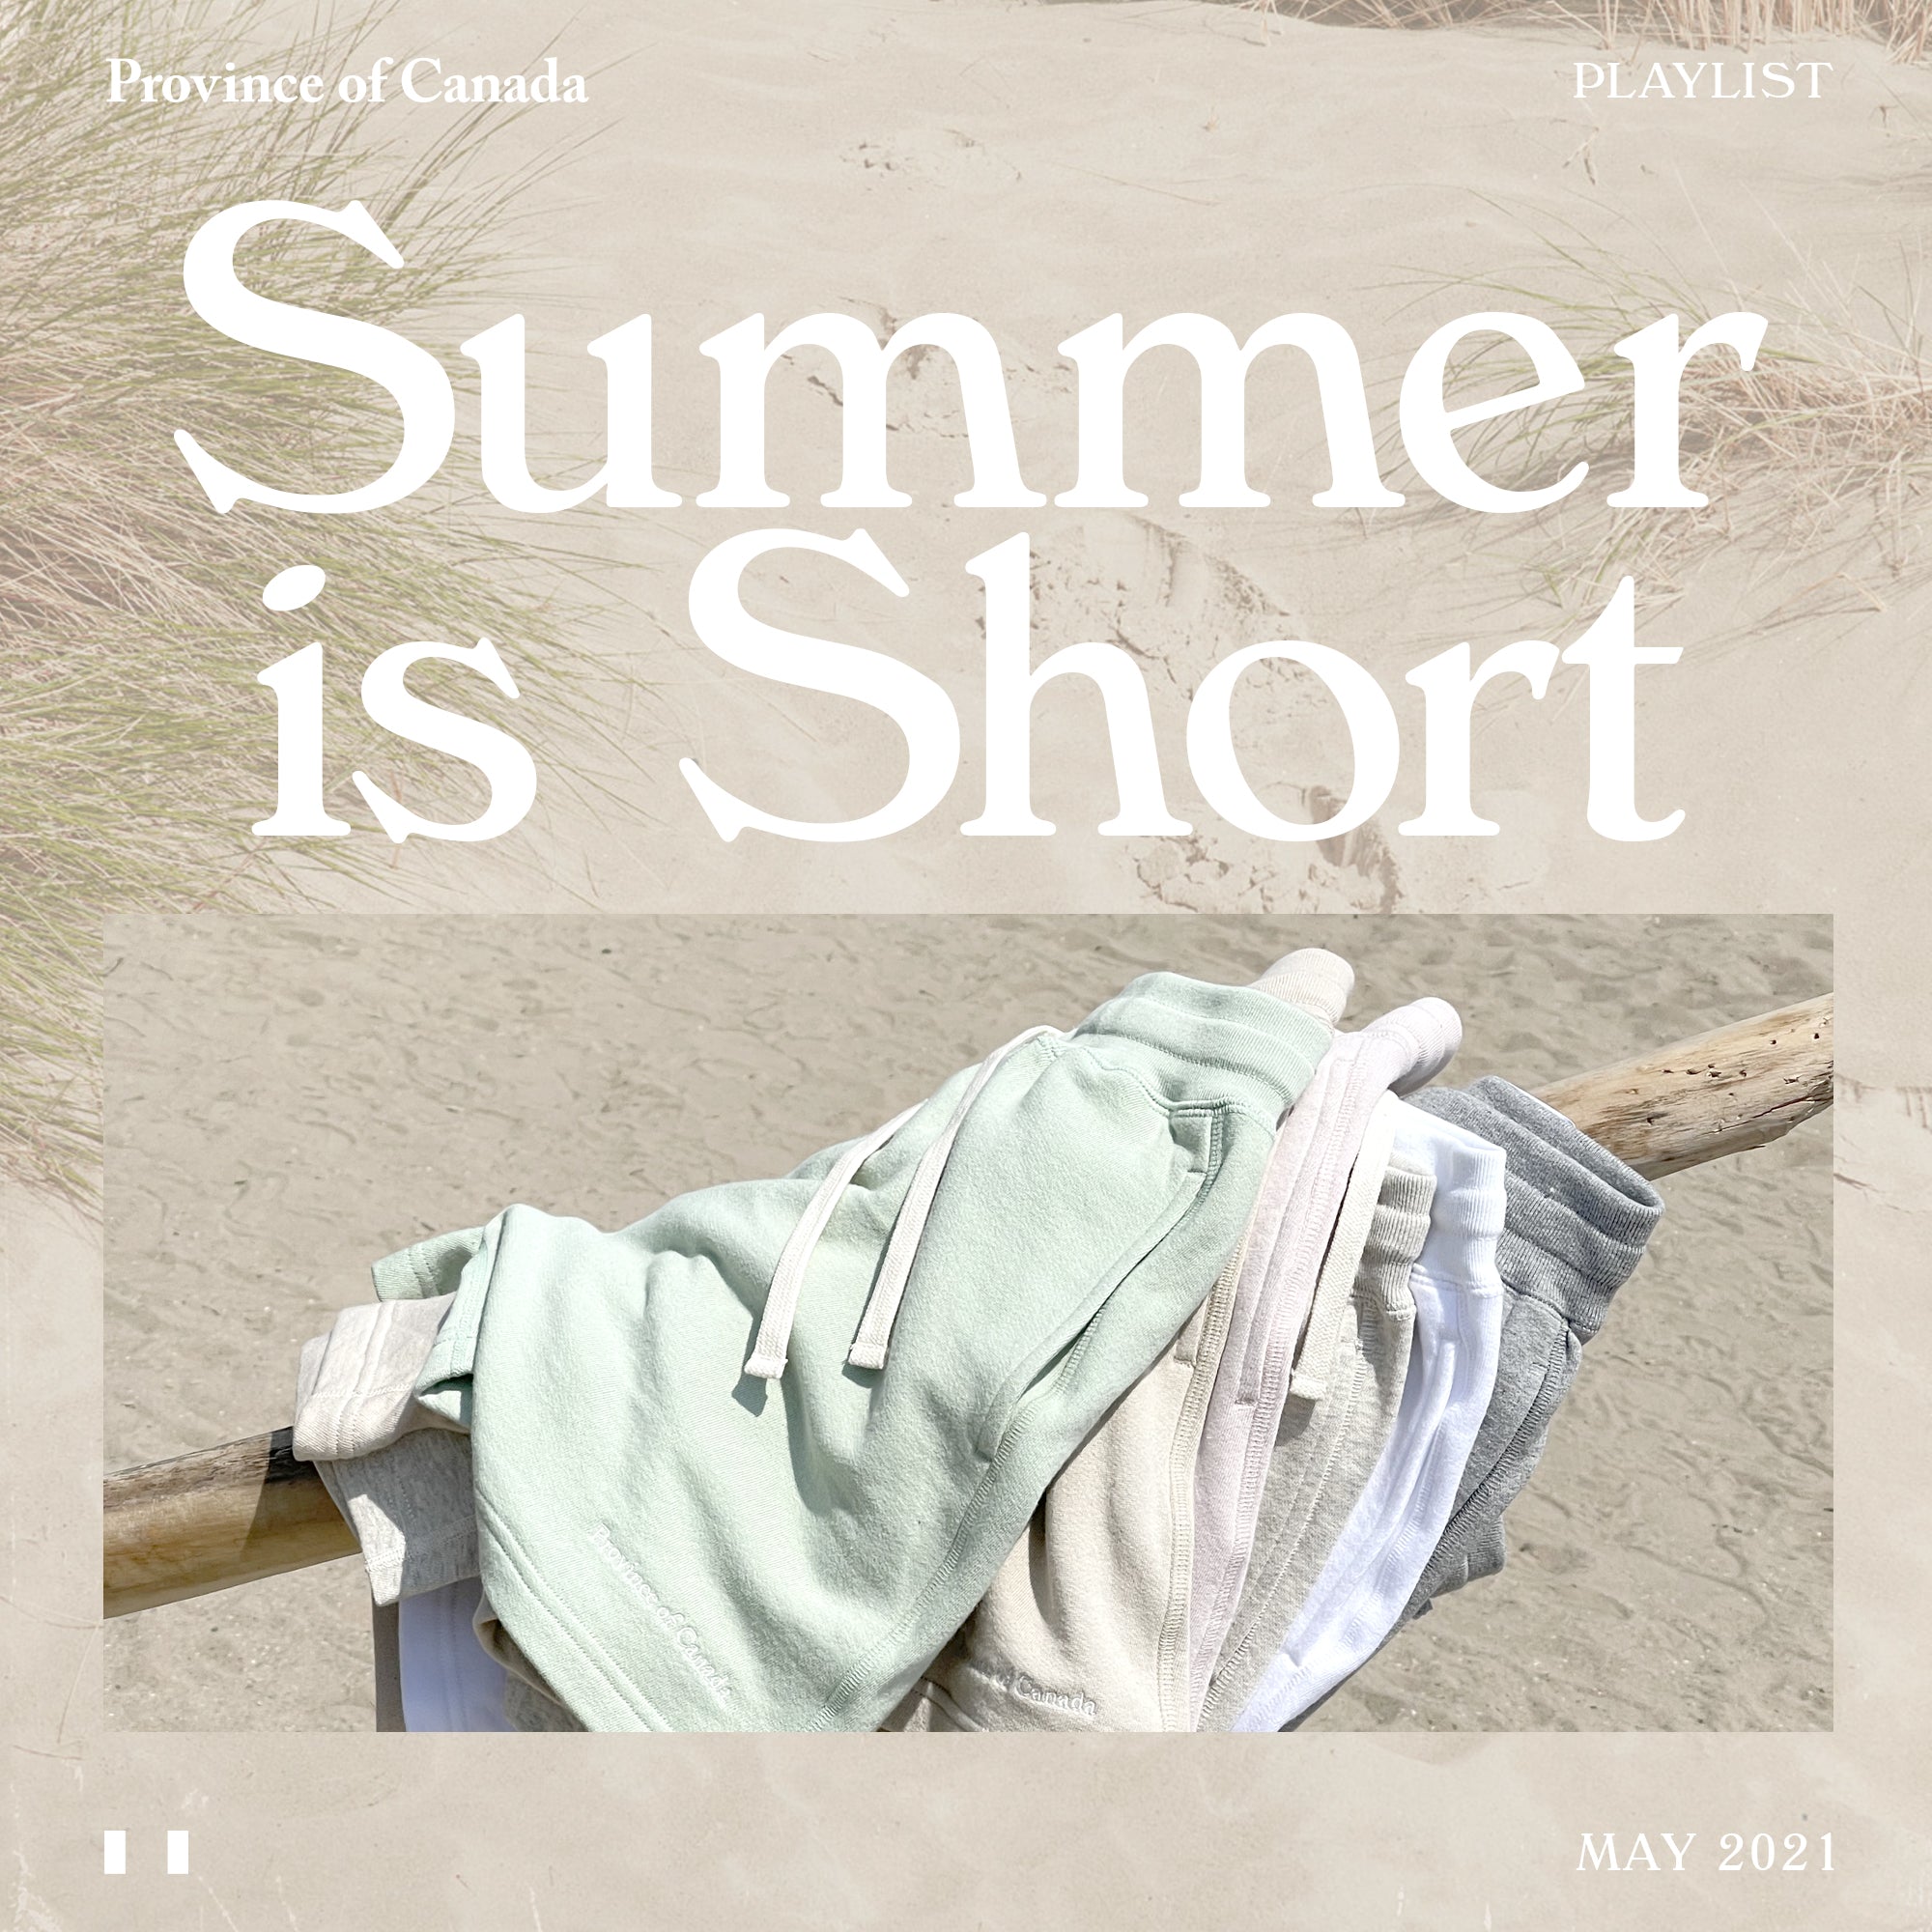 Province of Canada - Playlist - Summer is Short